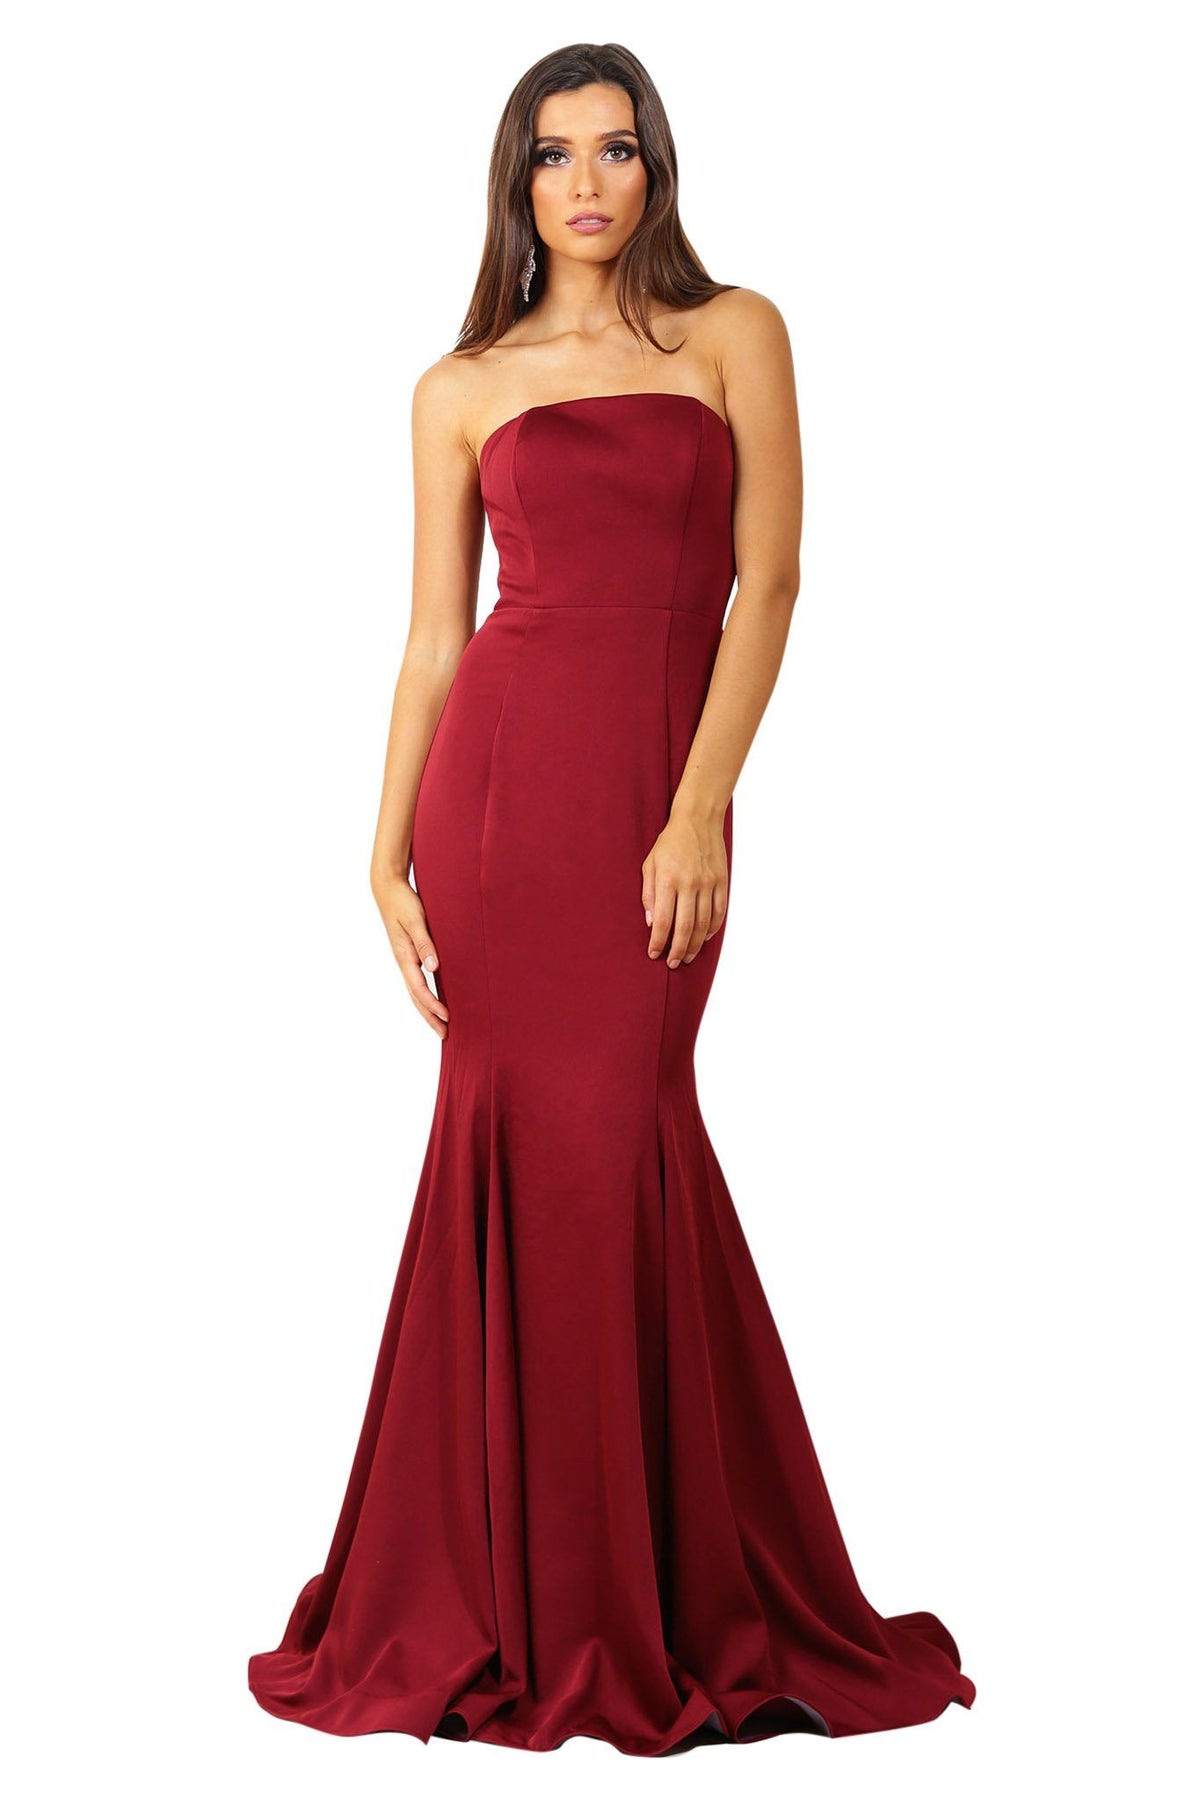 Wine red colored strapless straight neckline boned bodice fitted evening gown with floor sweeping train